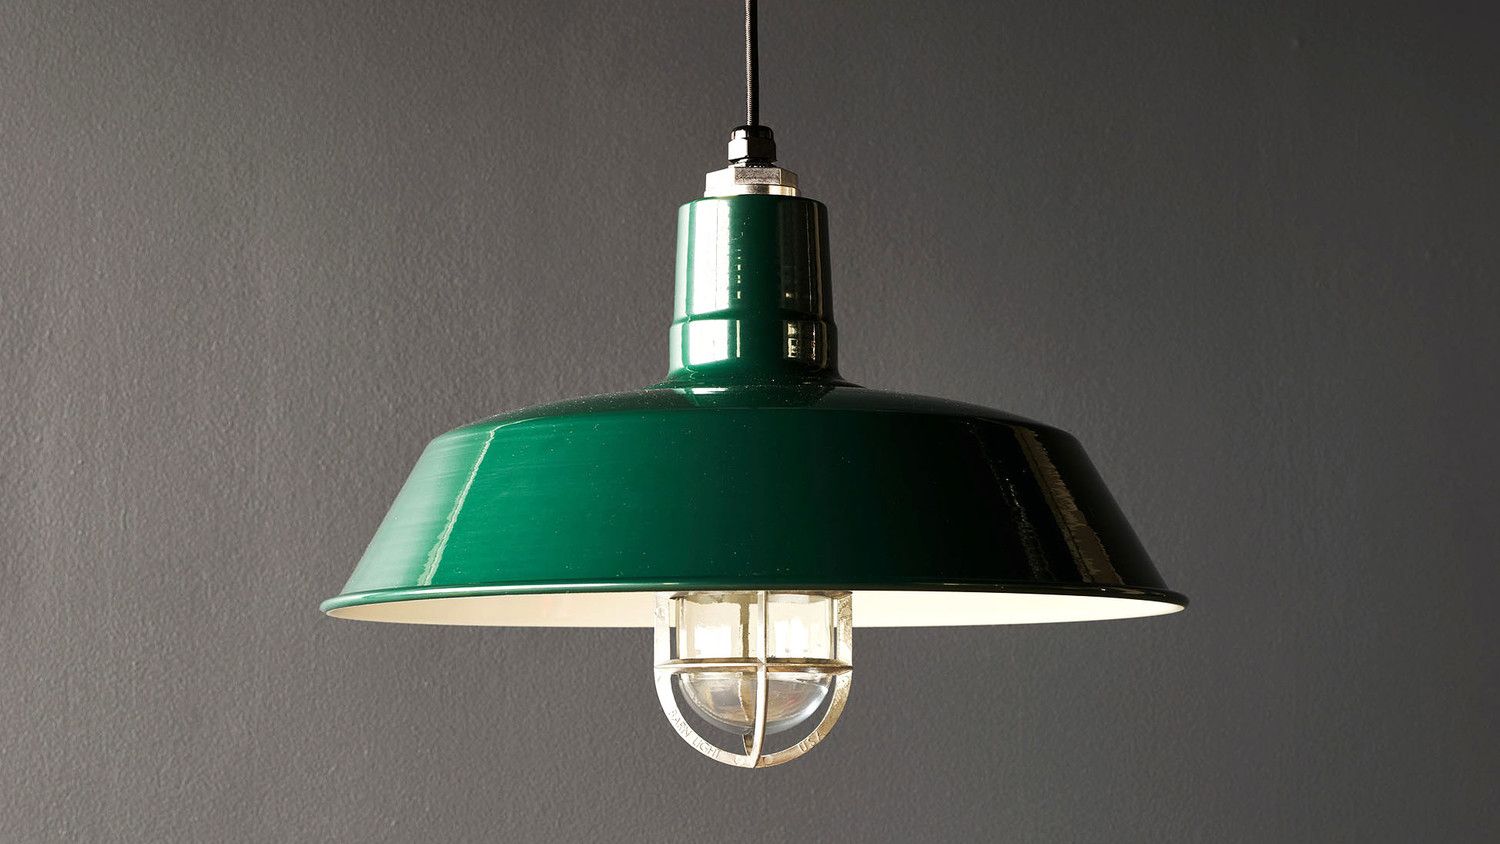 New Seasonal Sales Are Here! 48% Off Laurel Foundry Modern With Regard To Kierra 4 Light Unique / Statement Chandeliers (View 28 of 30)